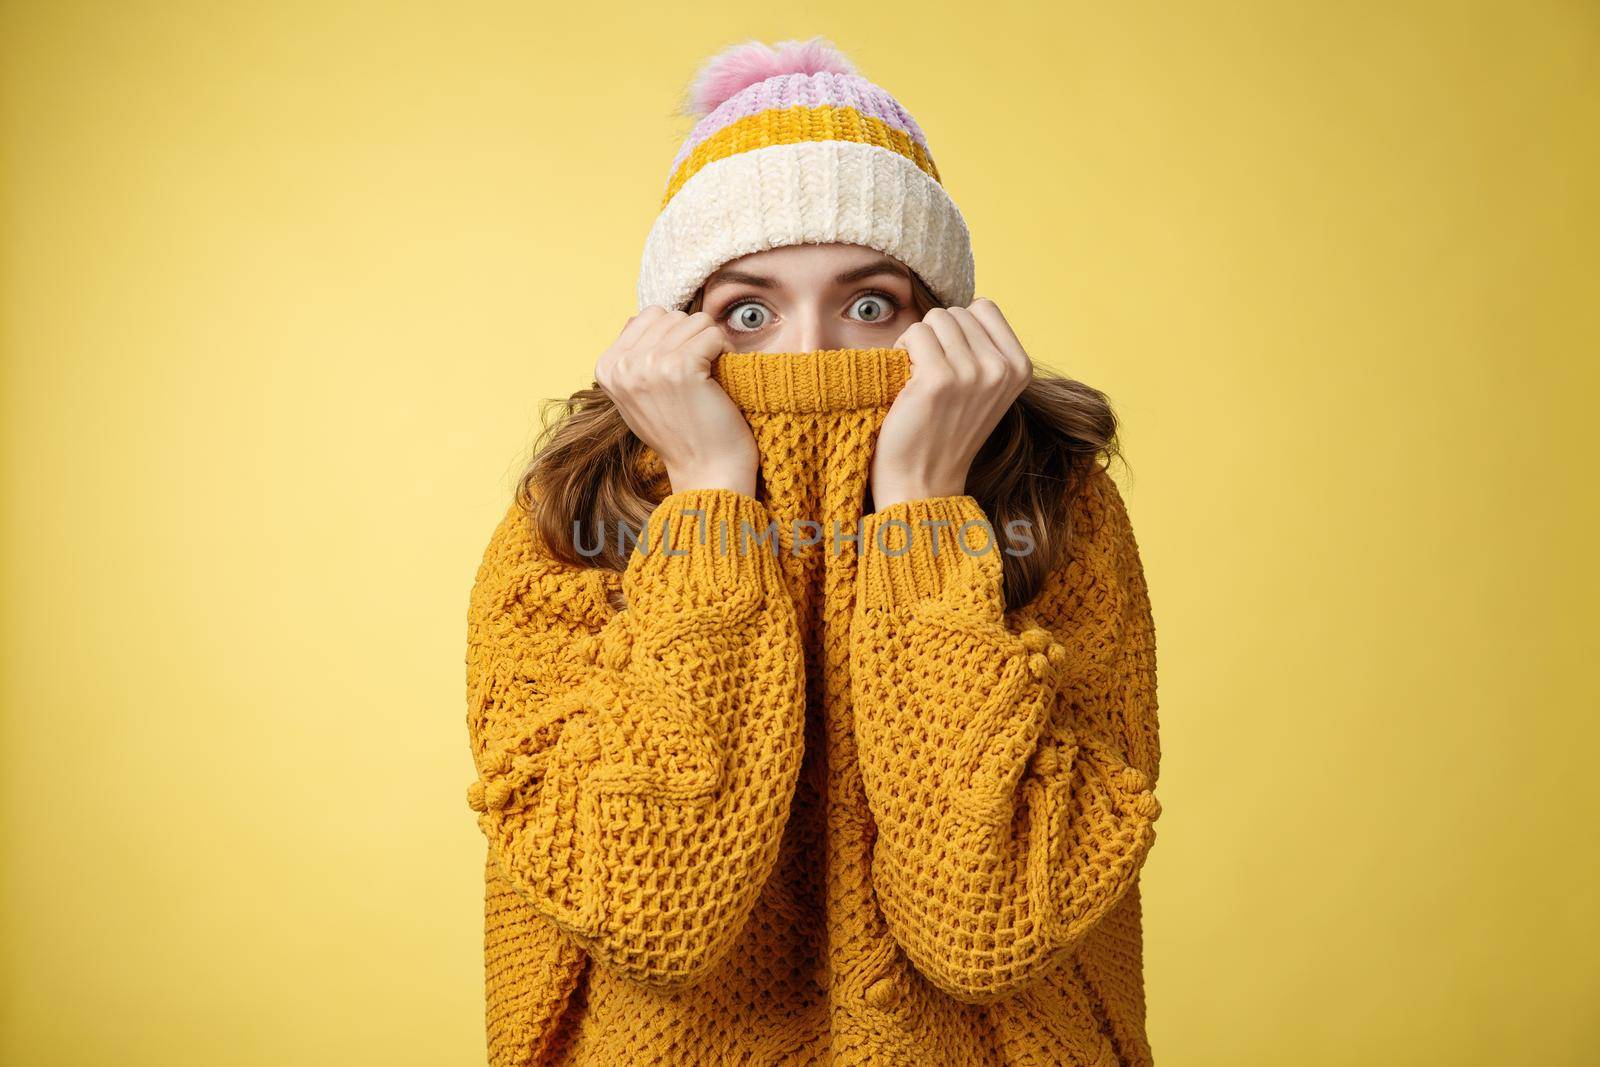 Portrait scared insecure timid cute girl hiding face pull sweater nose widen eyes afraid stunned standing stupor yellow background wearing winter hat, frightened terrified cold weather.